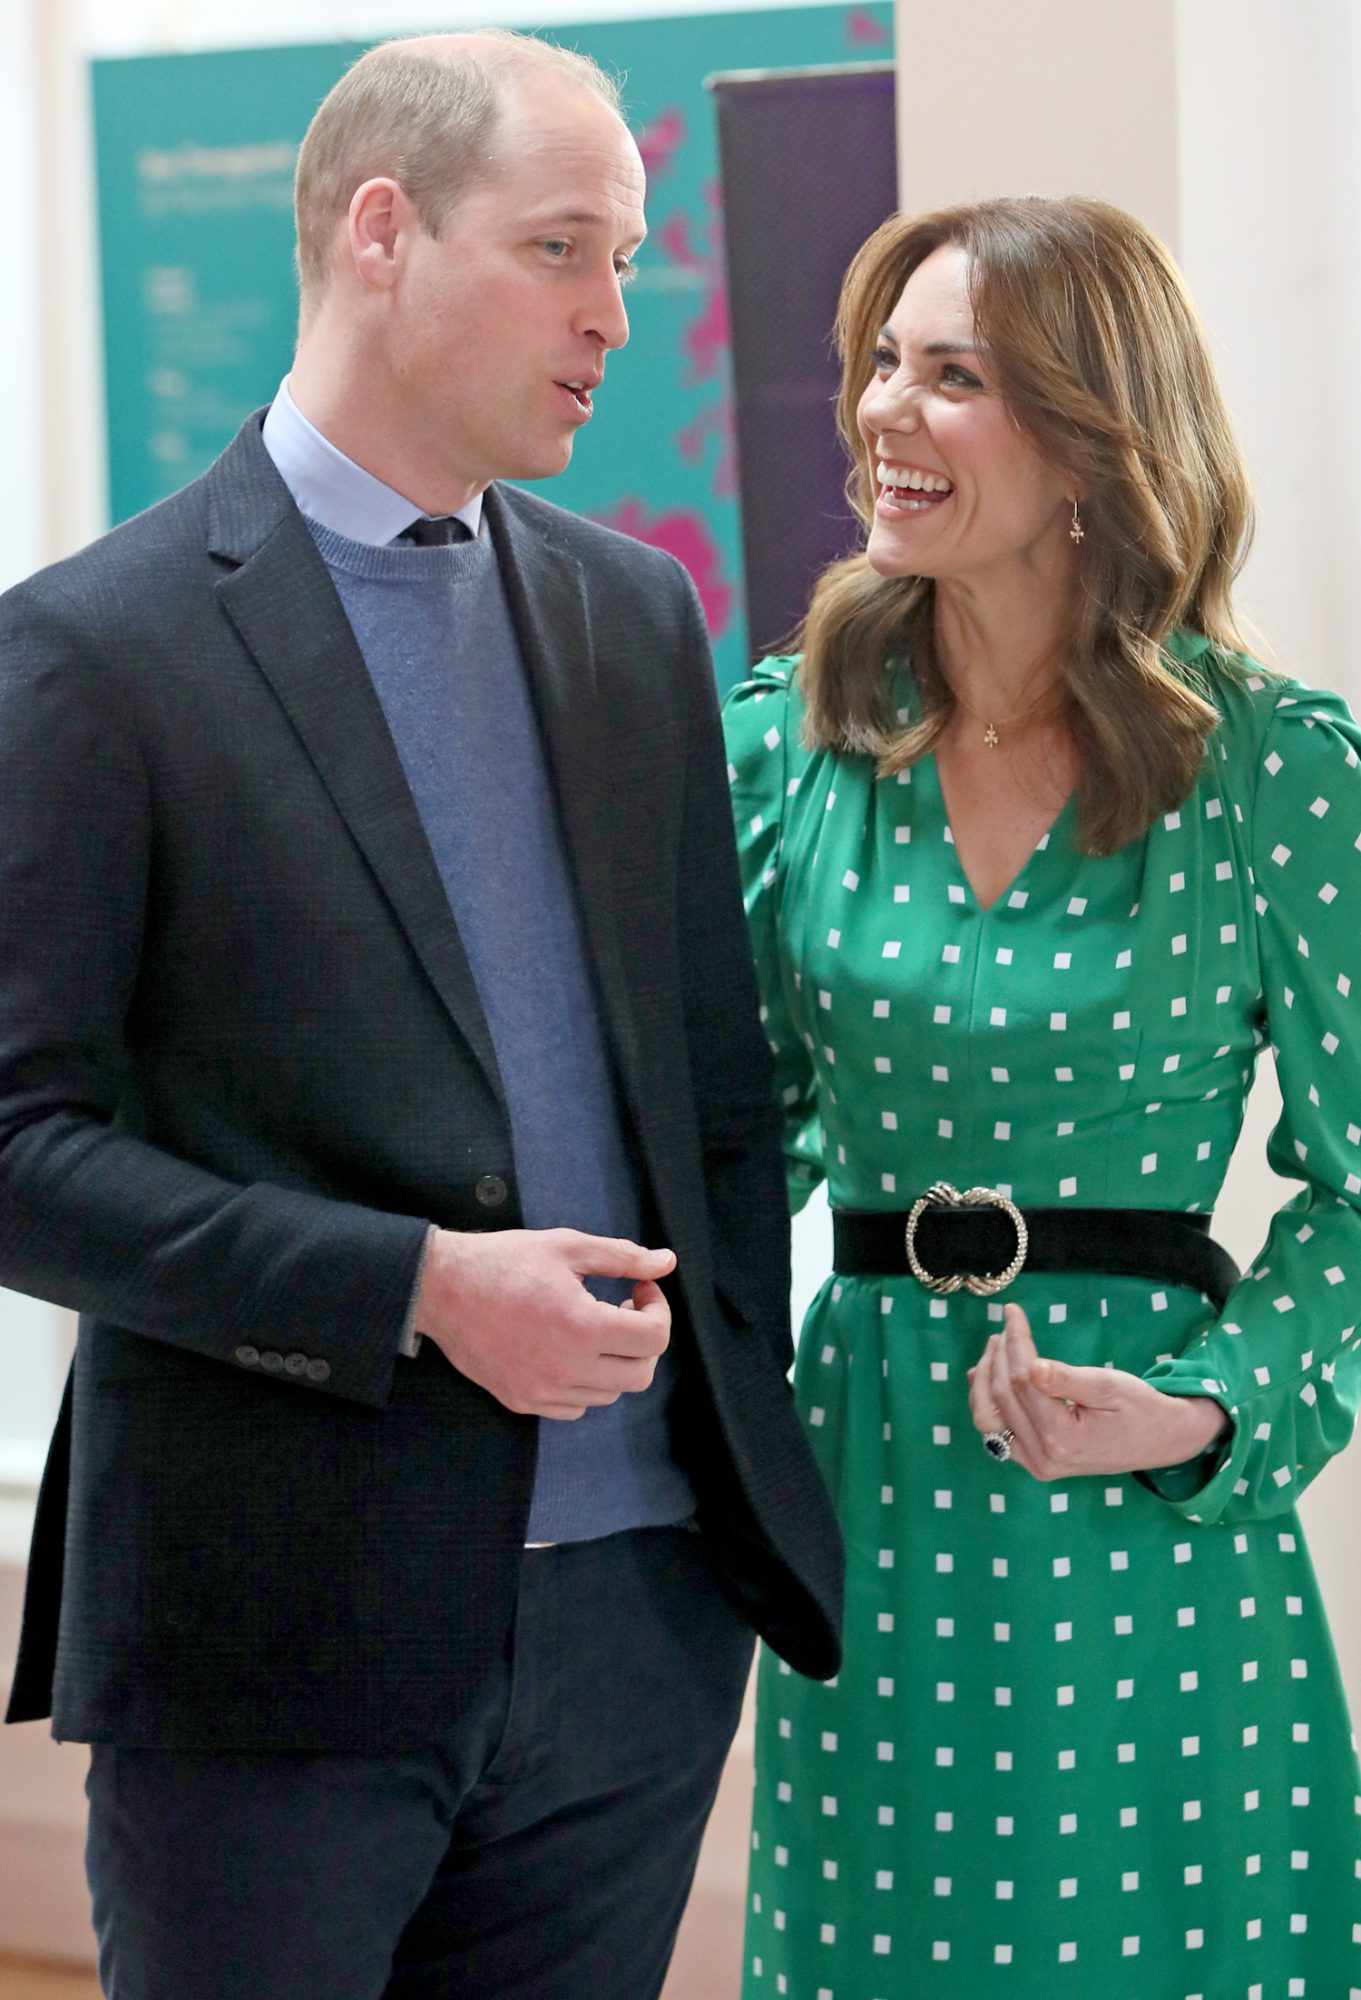 The Duke and Duchess of Cambridge visit Galway